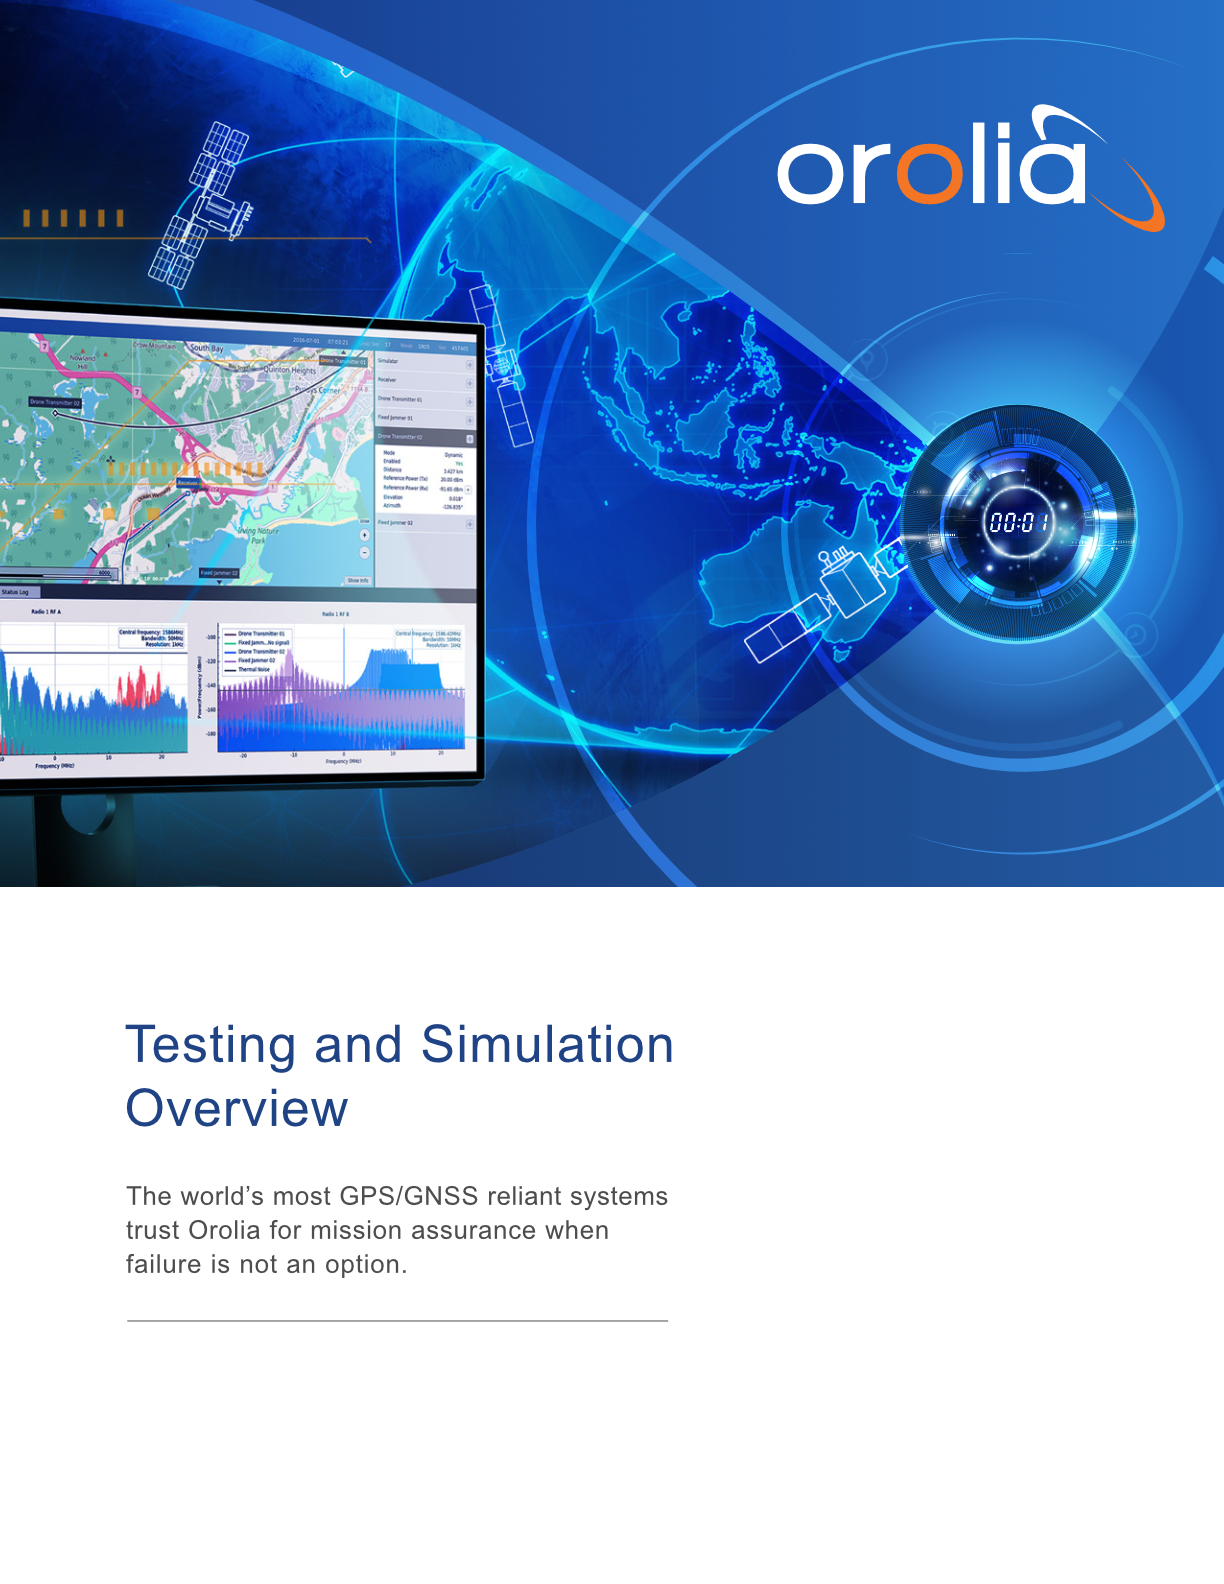 Orolia Simulation and IDM Overview Brochure